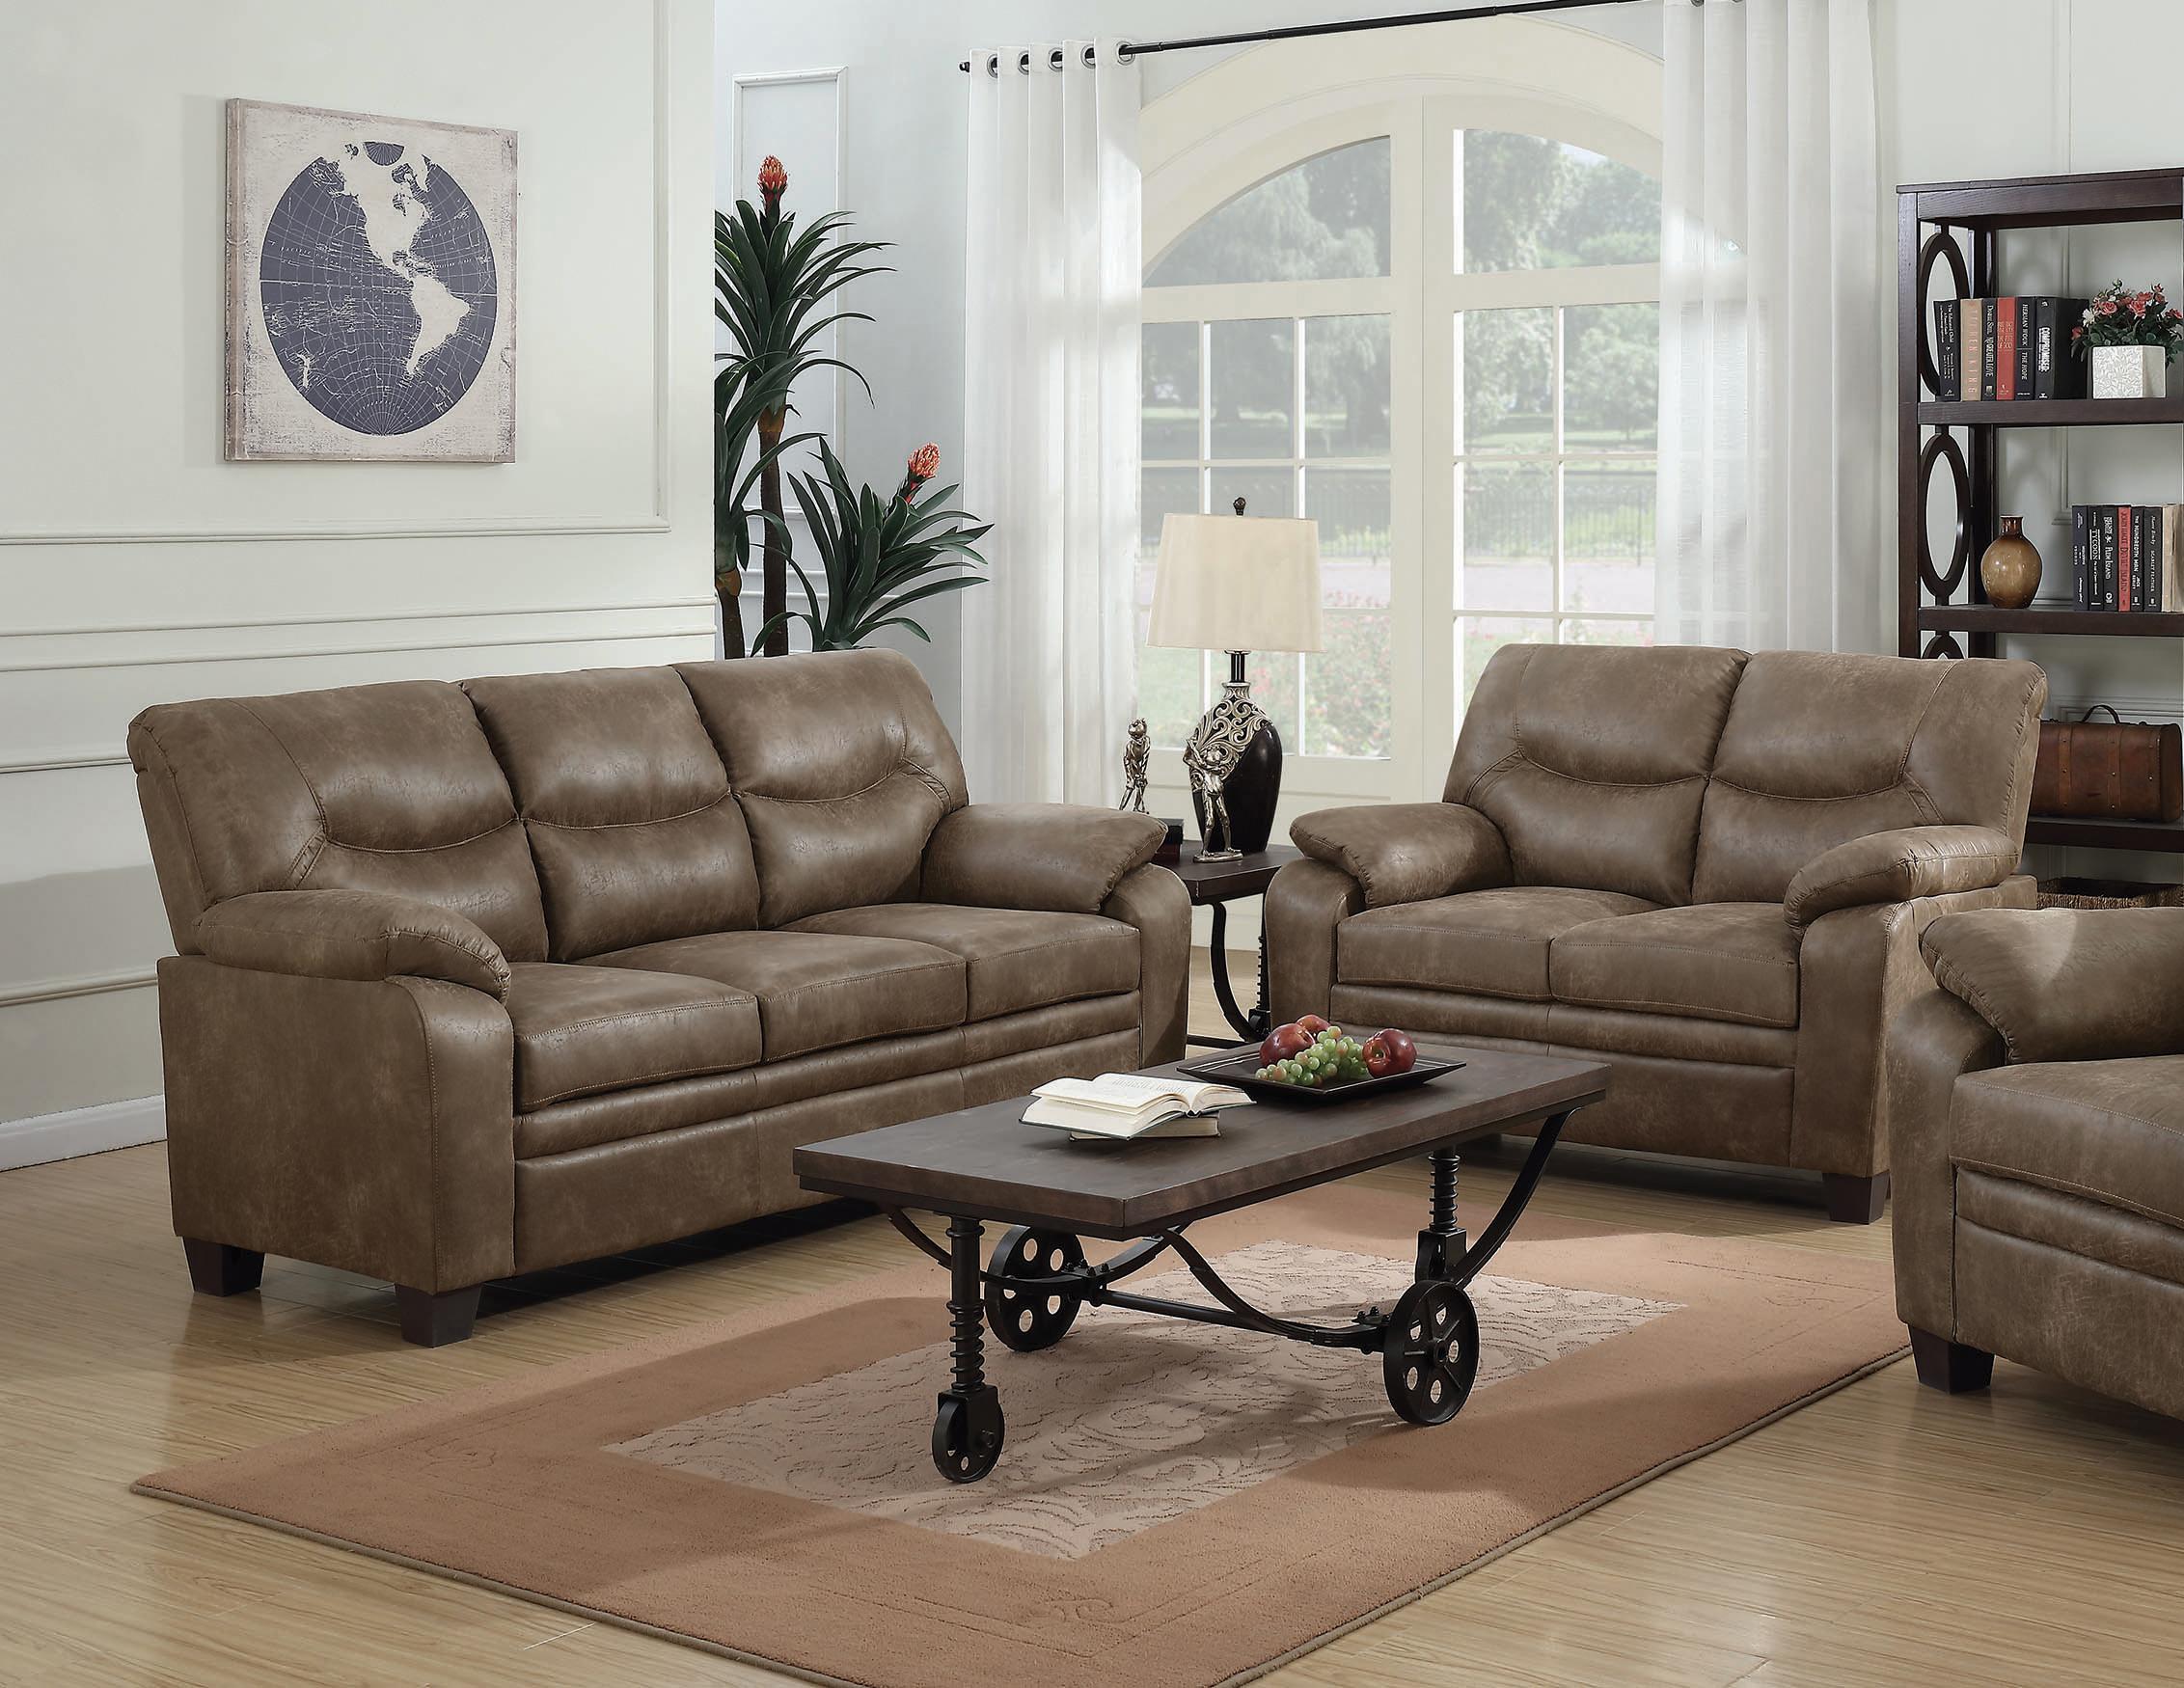 Classic Living Room Set 506561-S2 Meagan 506561-S2 in Brown 